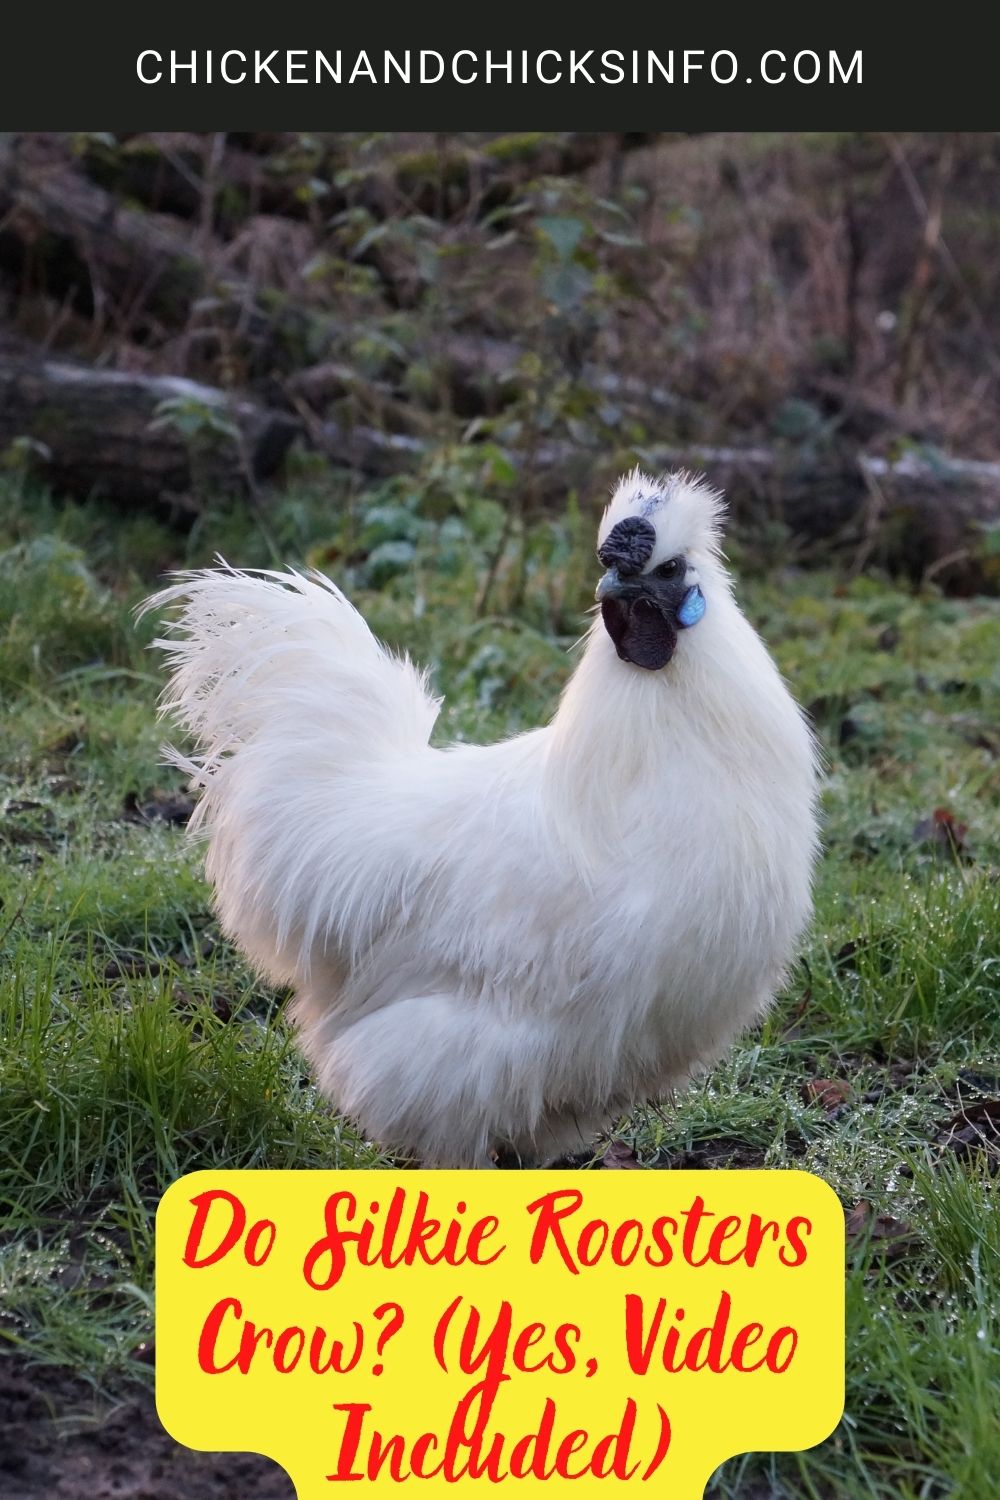 Do Silkie Roosters Crow? (Yes, Video Included) poster.
